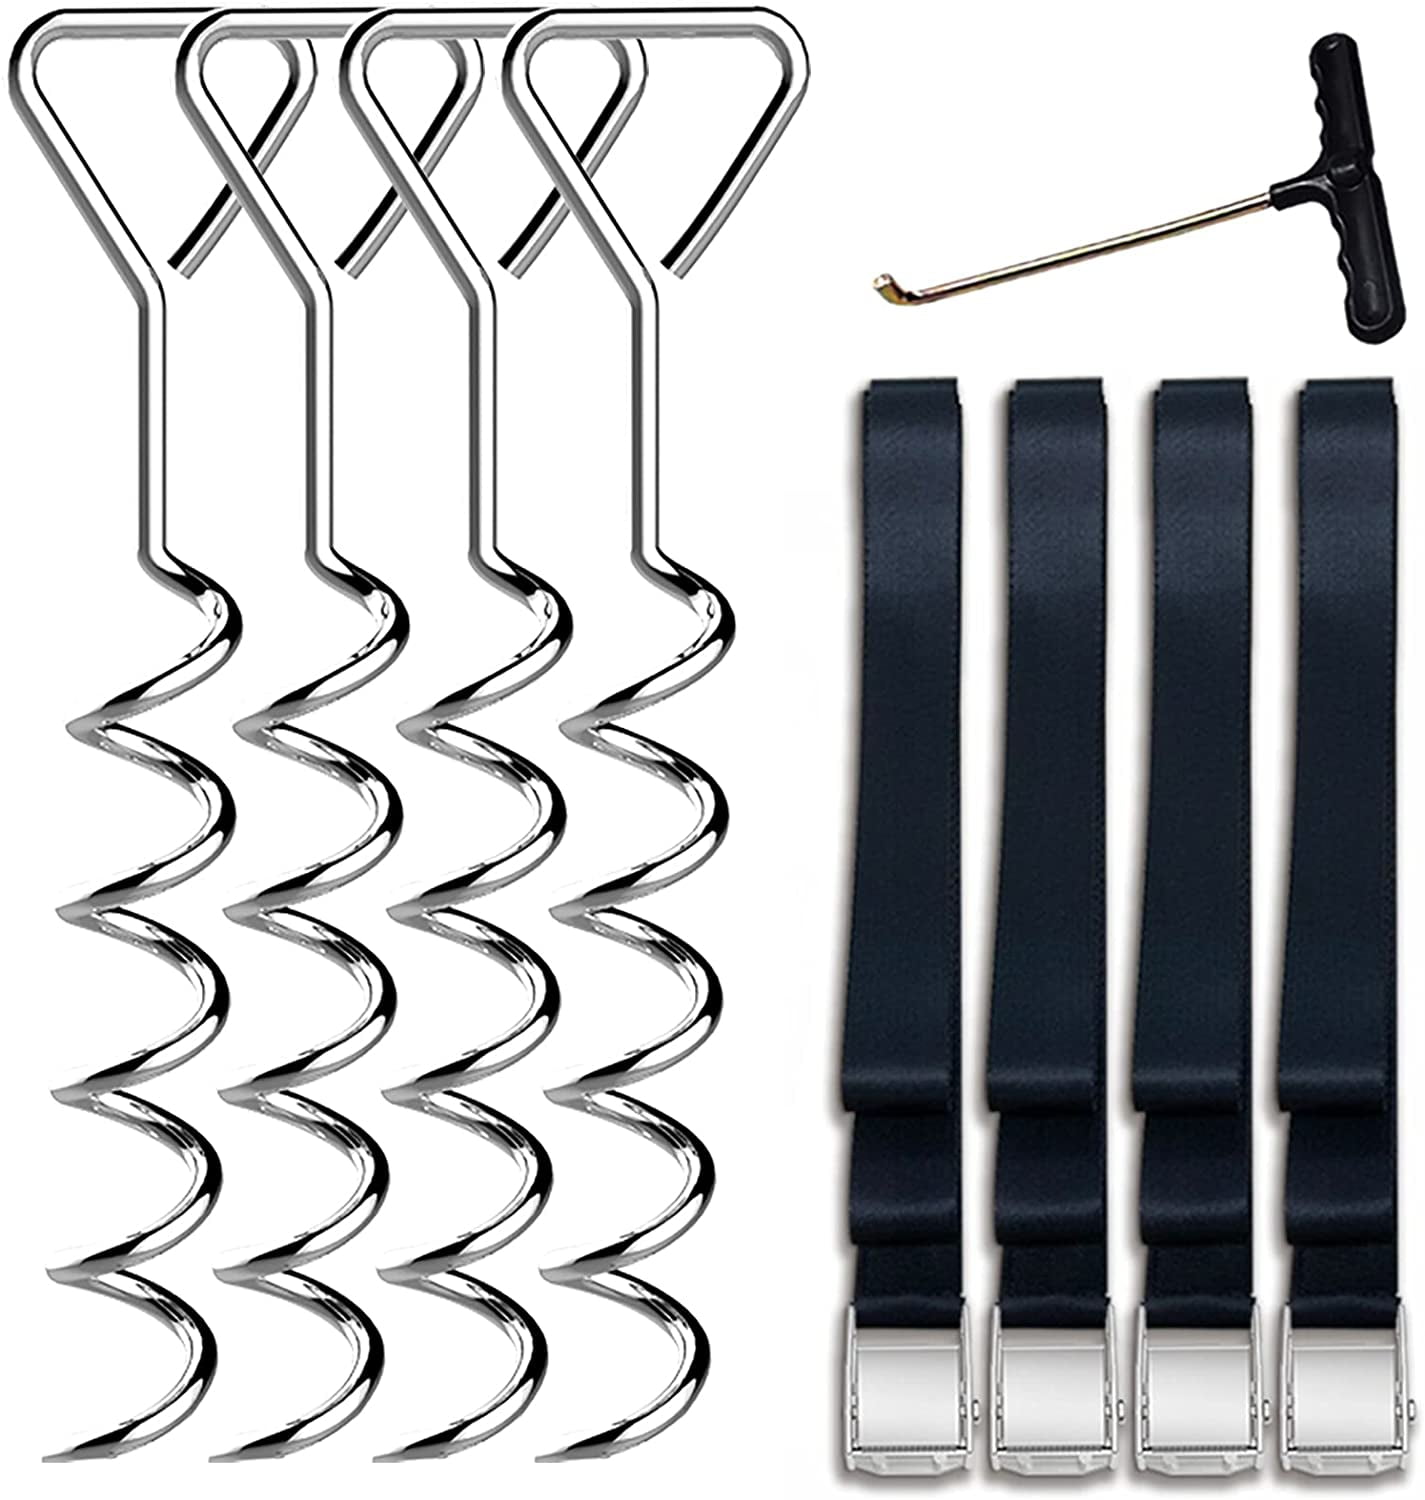 Eurmax Trampoline Stakes Heavy Duty Trampoline Parts Corkscrew Shape Steel Stakes Anchor Kit with T Hook for Trampolines -Set of 4